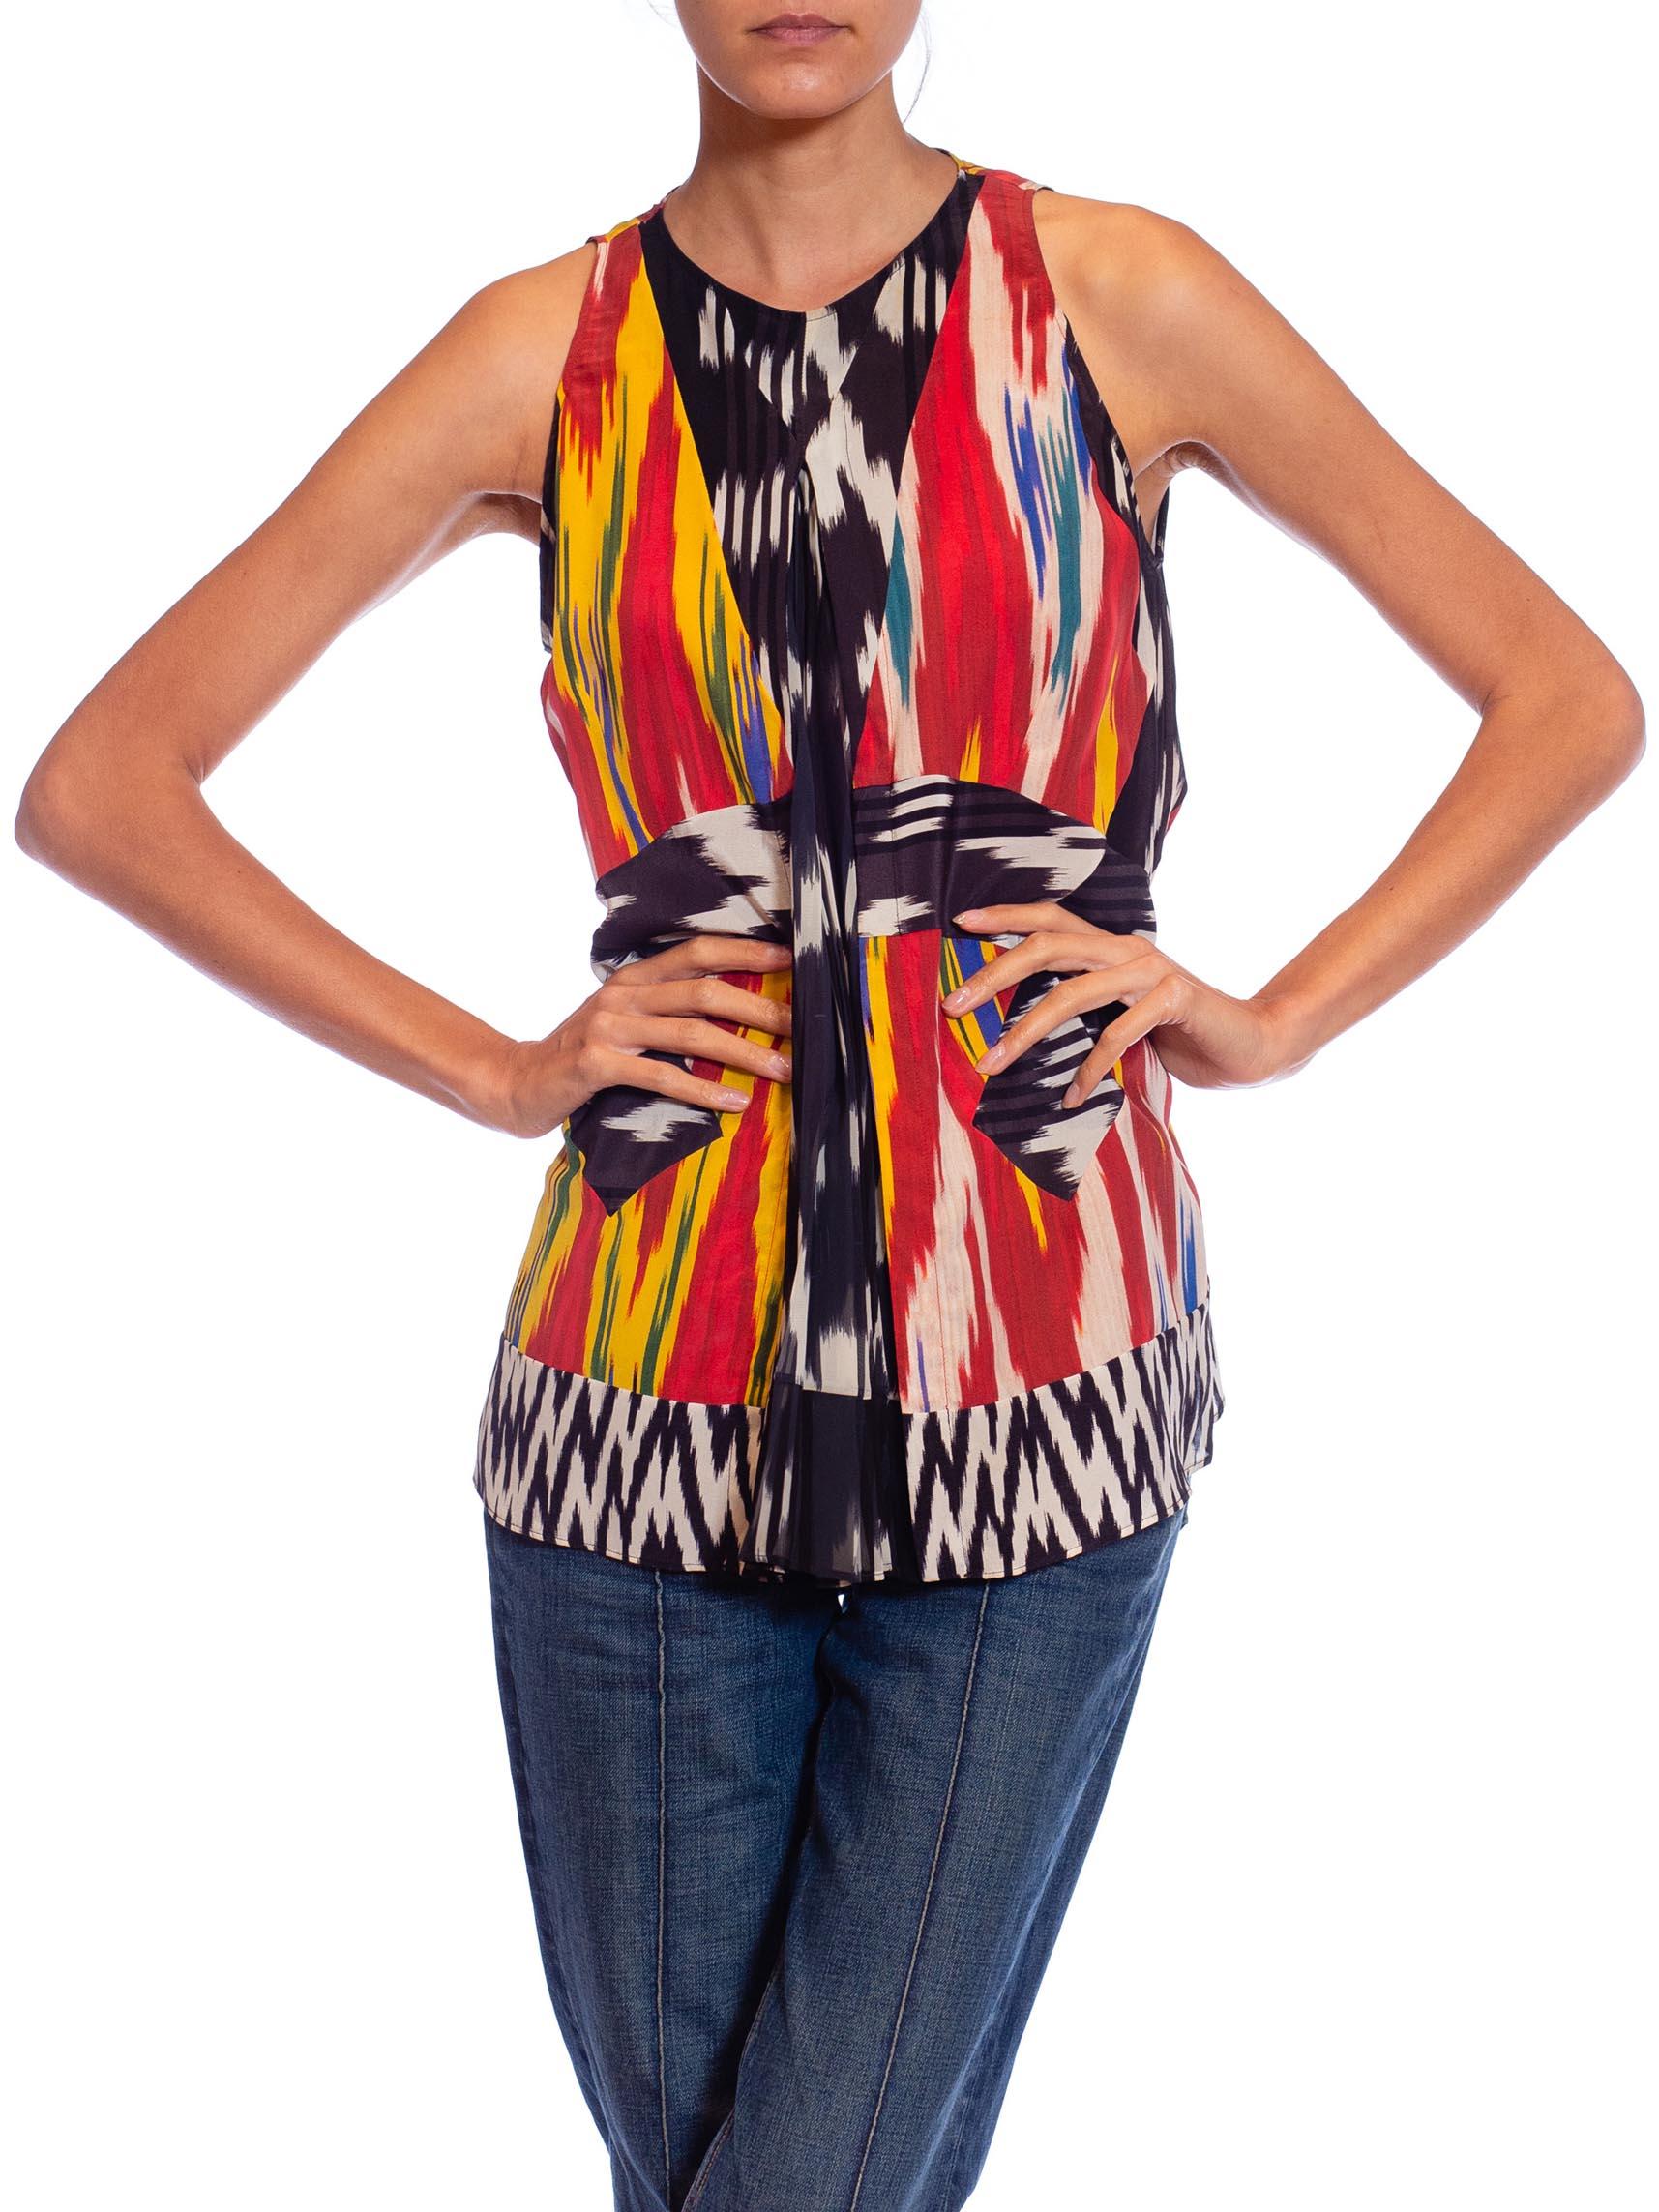 2010S ALTUZARRA Silk Ikat Print Sleeveless Top In Excellent Condition For Sale In New York, NY